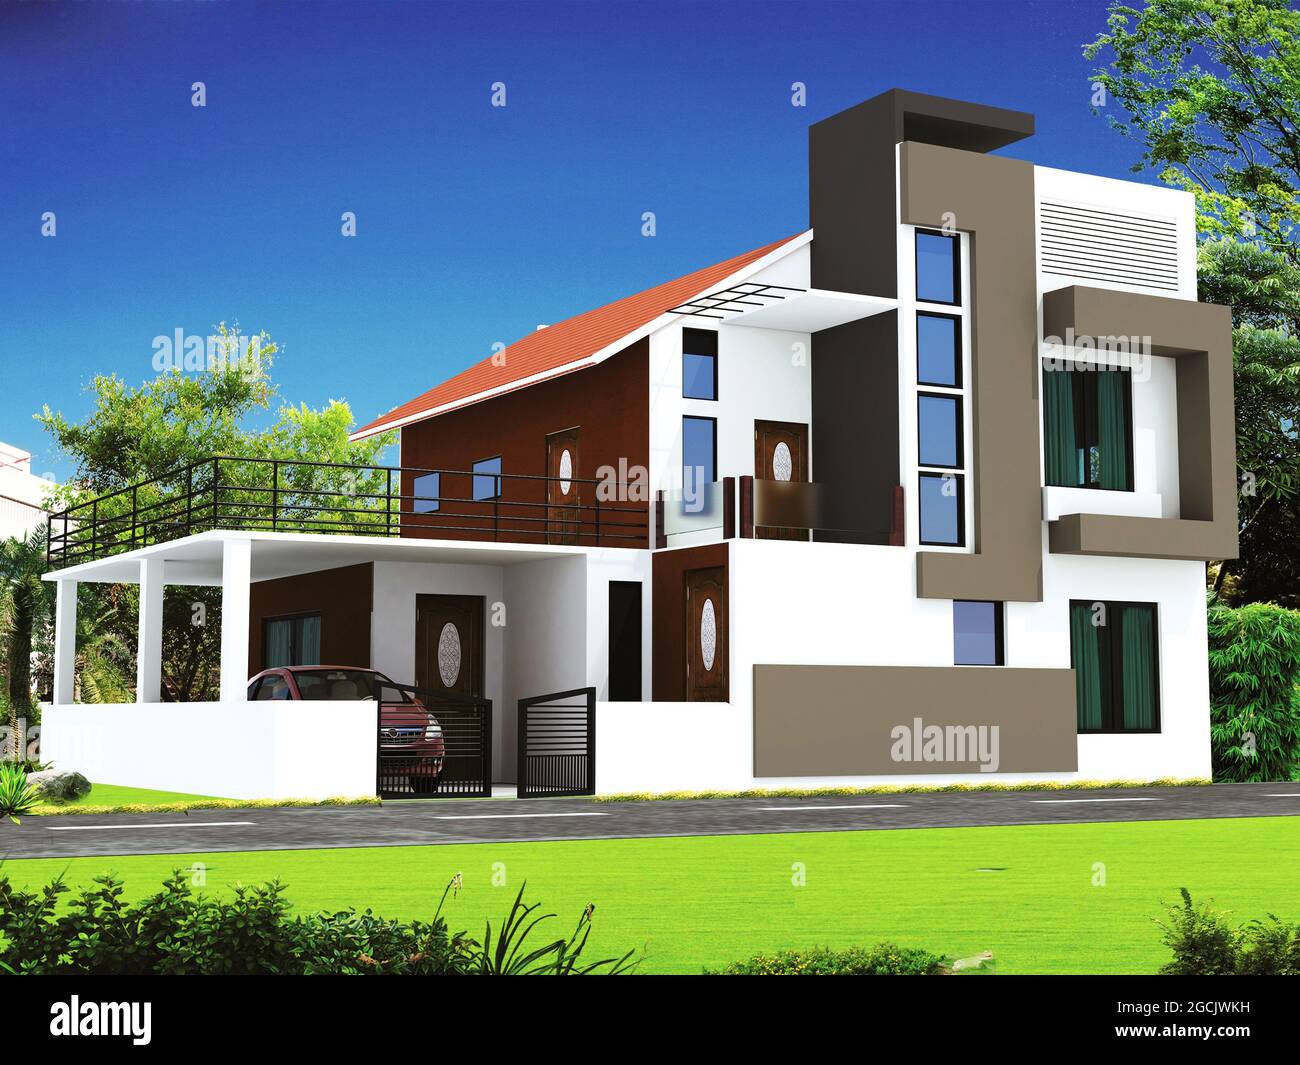 3D rendering of a duplex house with an abstract exterior design and a car  Stock Photo - Alamy